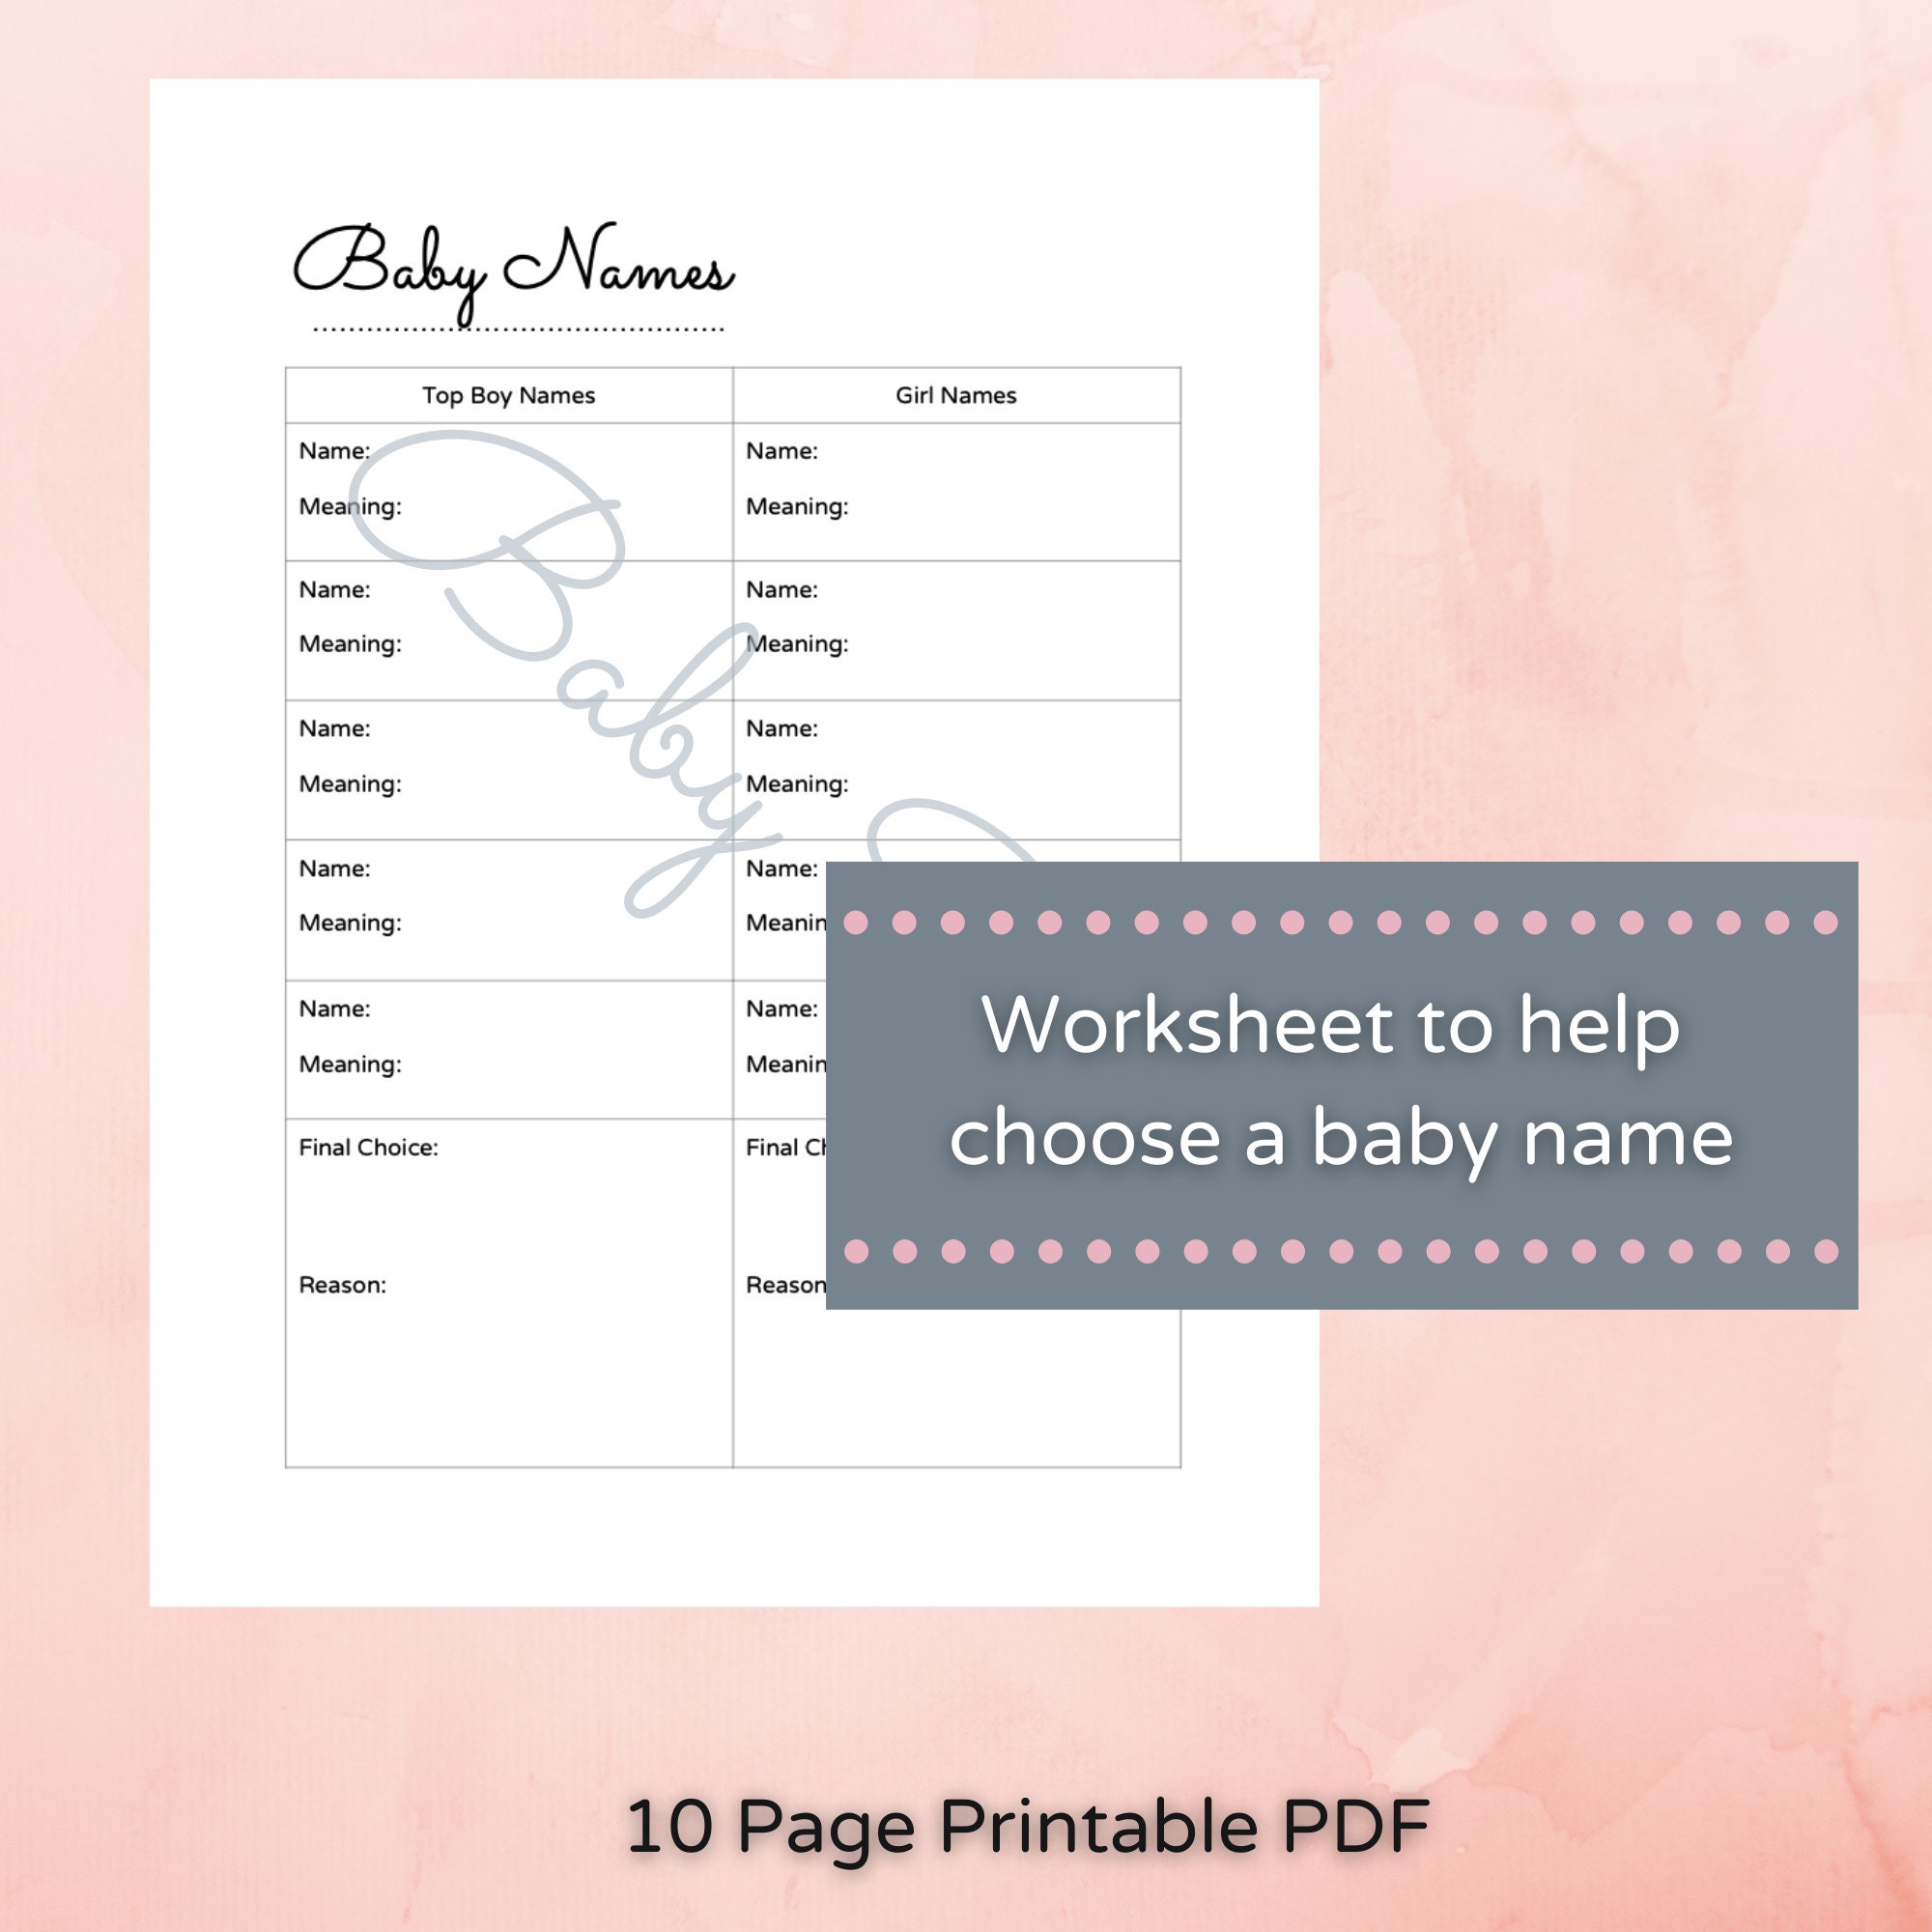 Printable Pregnancy Planner and Checklists Registry Hospital - Etsy